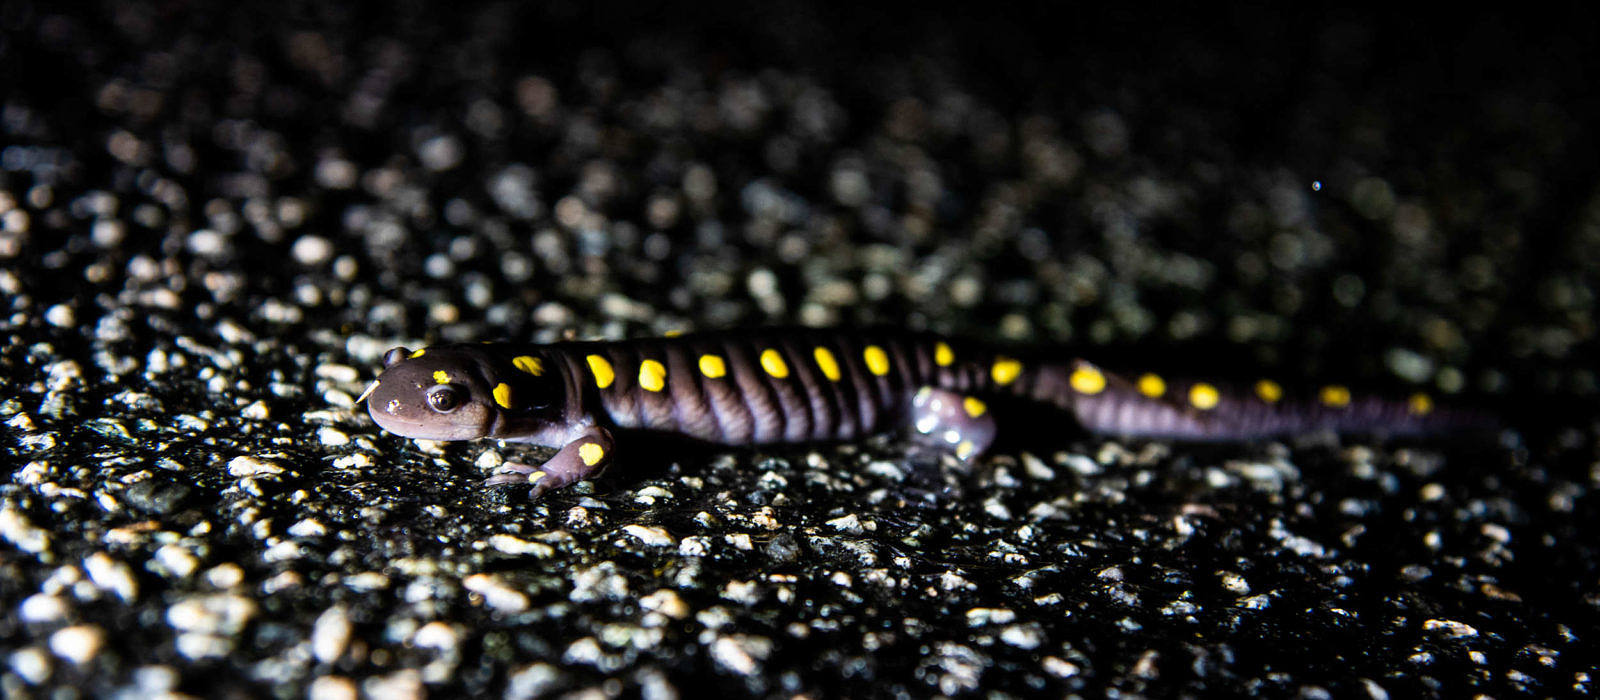 A spotted salamander makes its way across North Lincoln Street in Keene. (photo © Brett Amy Thelen)